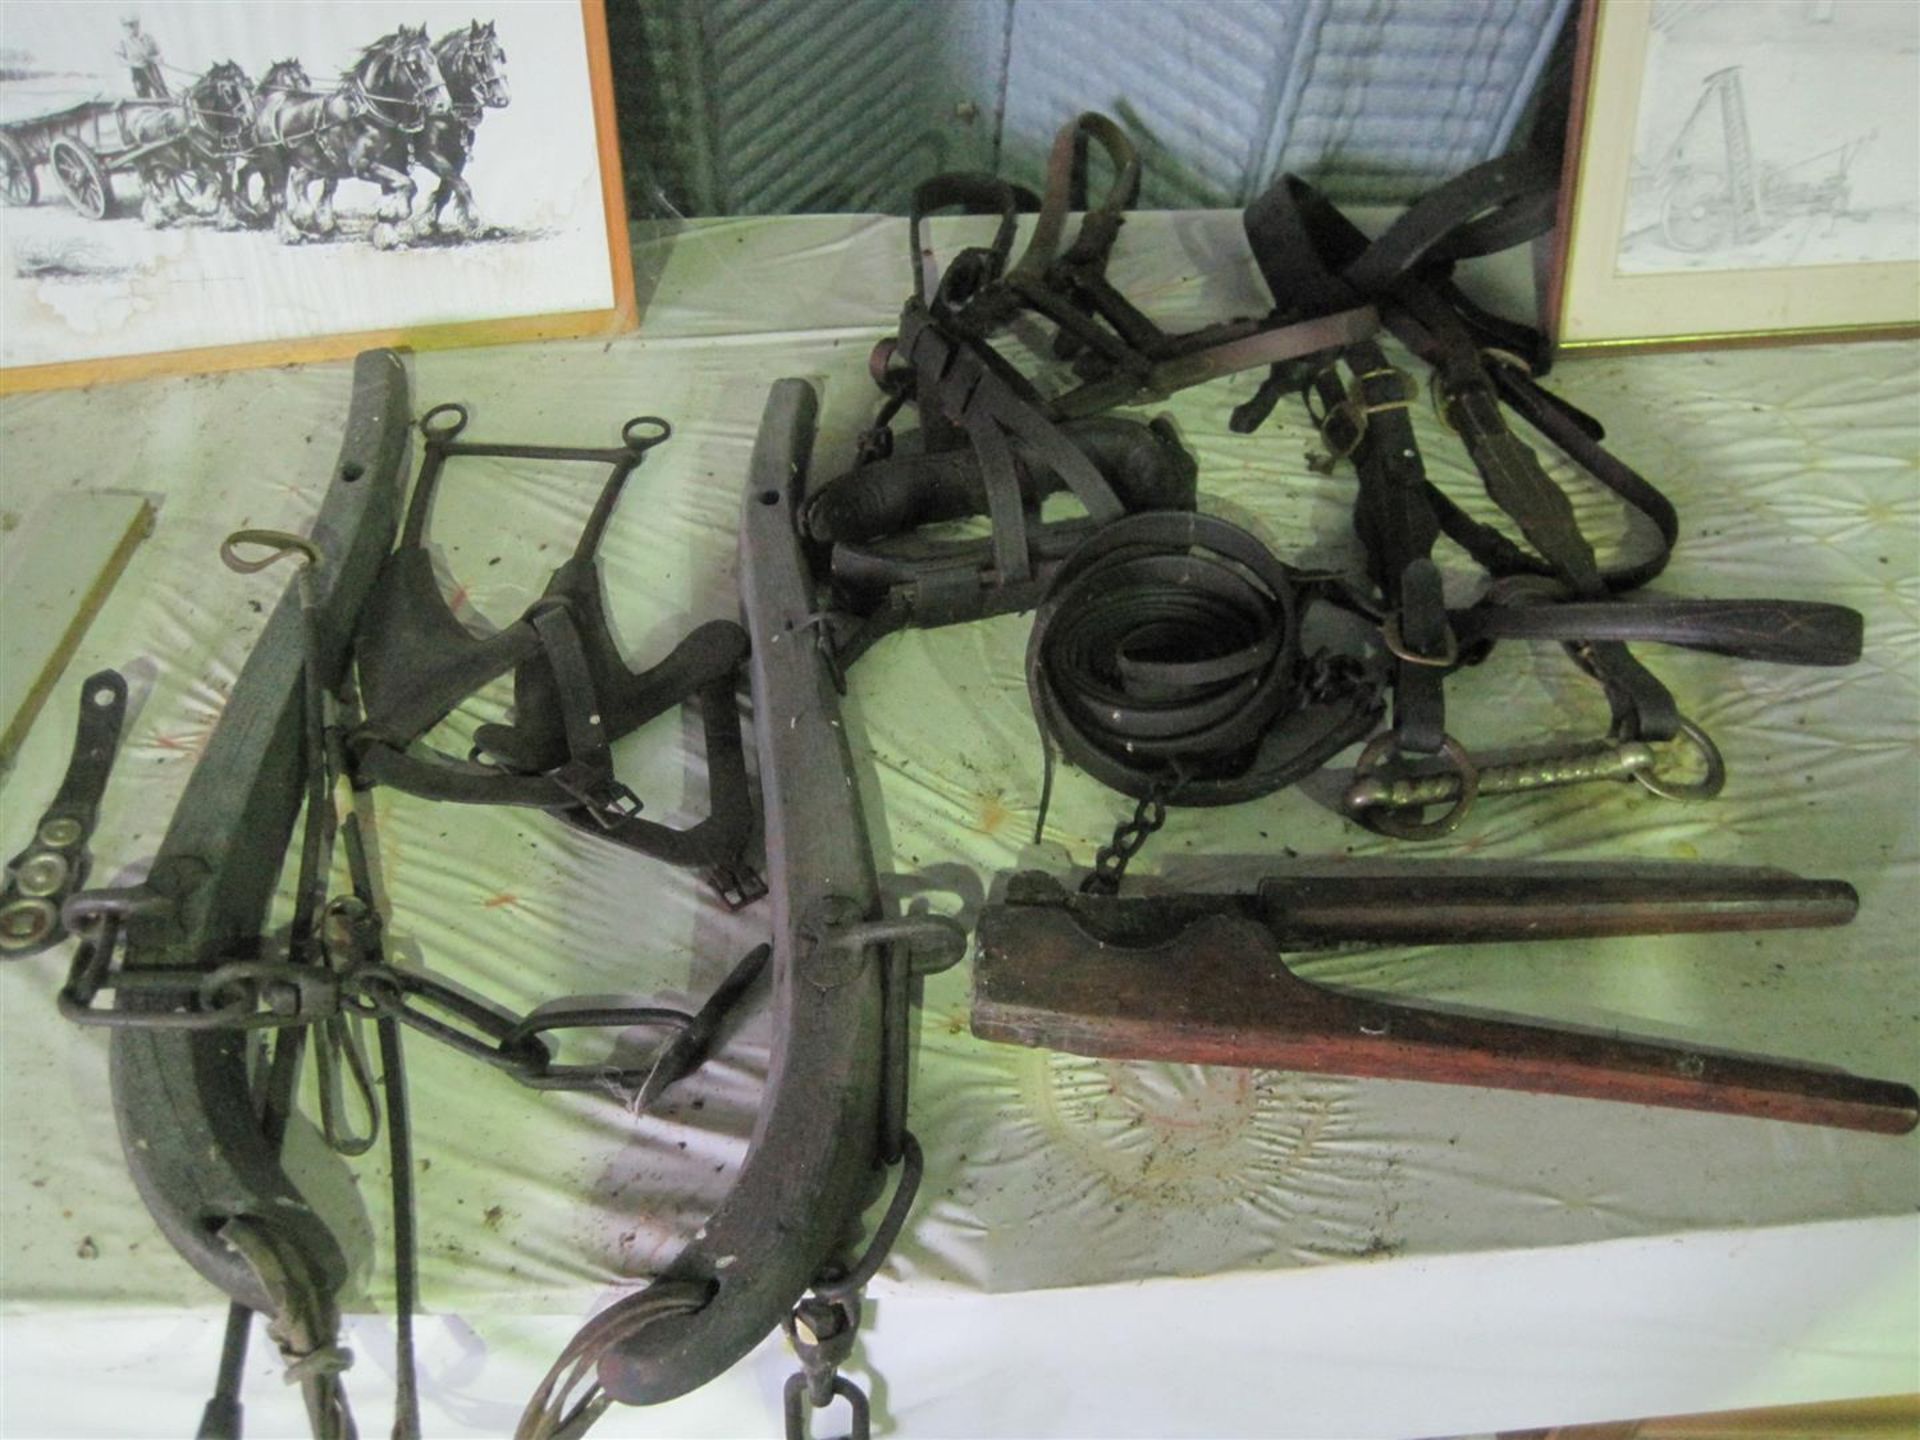 Pr. wooden horse harness, bridle, leathers etc and a castrating tool